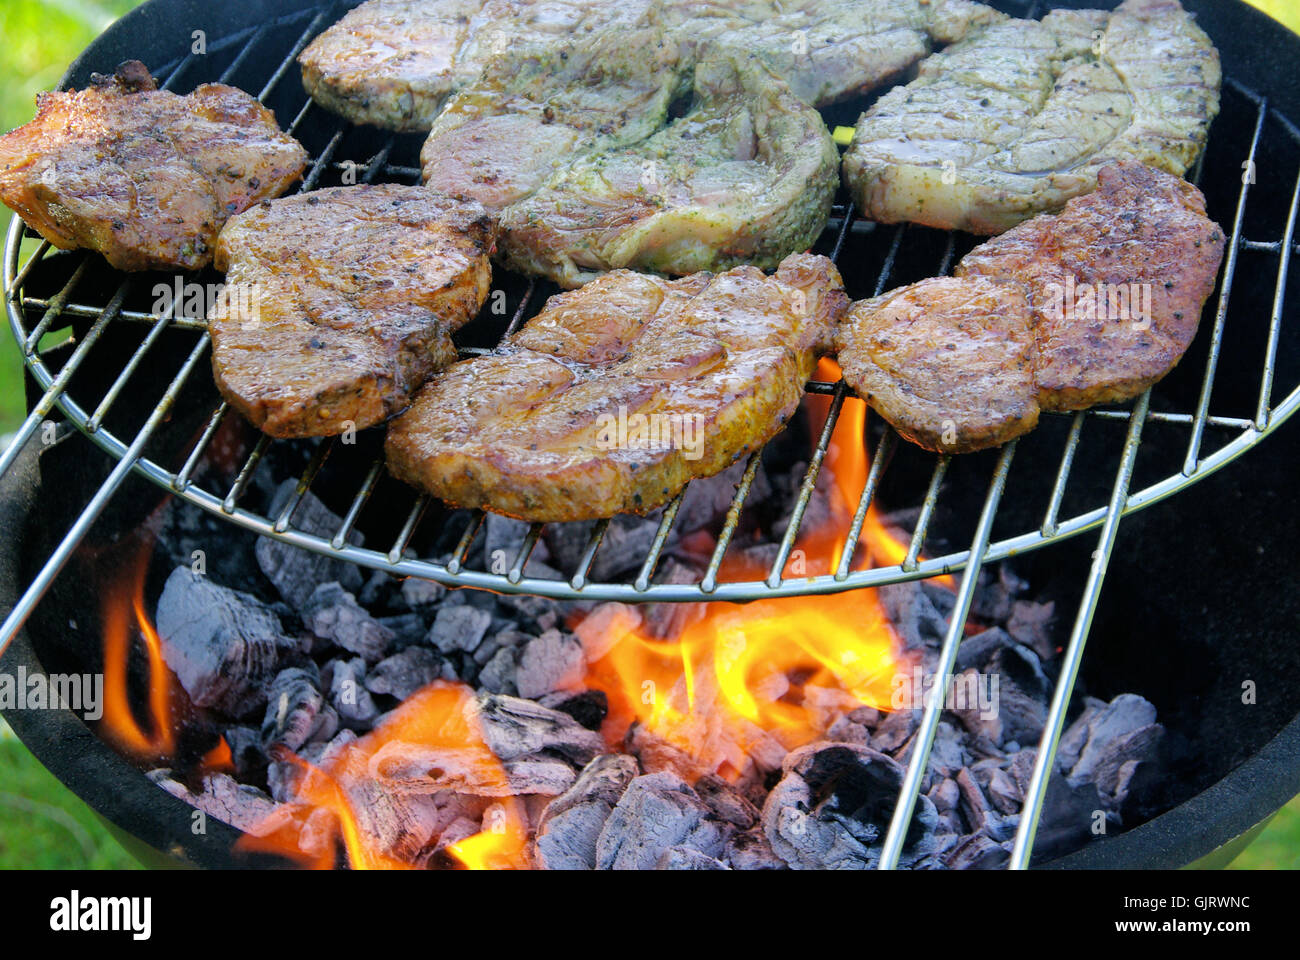 grill barbecue barbeque Stock Photo